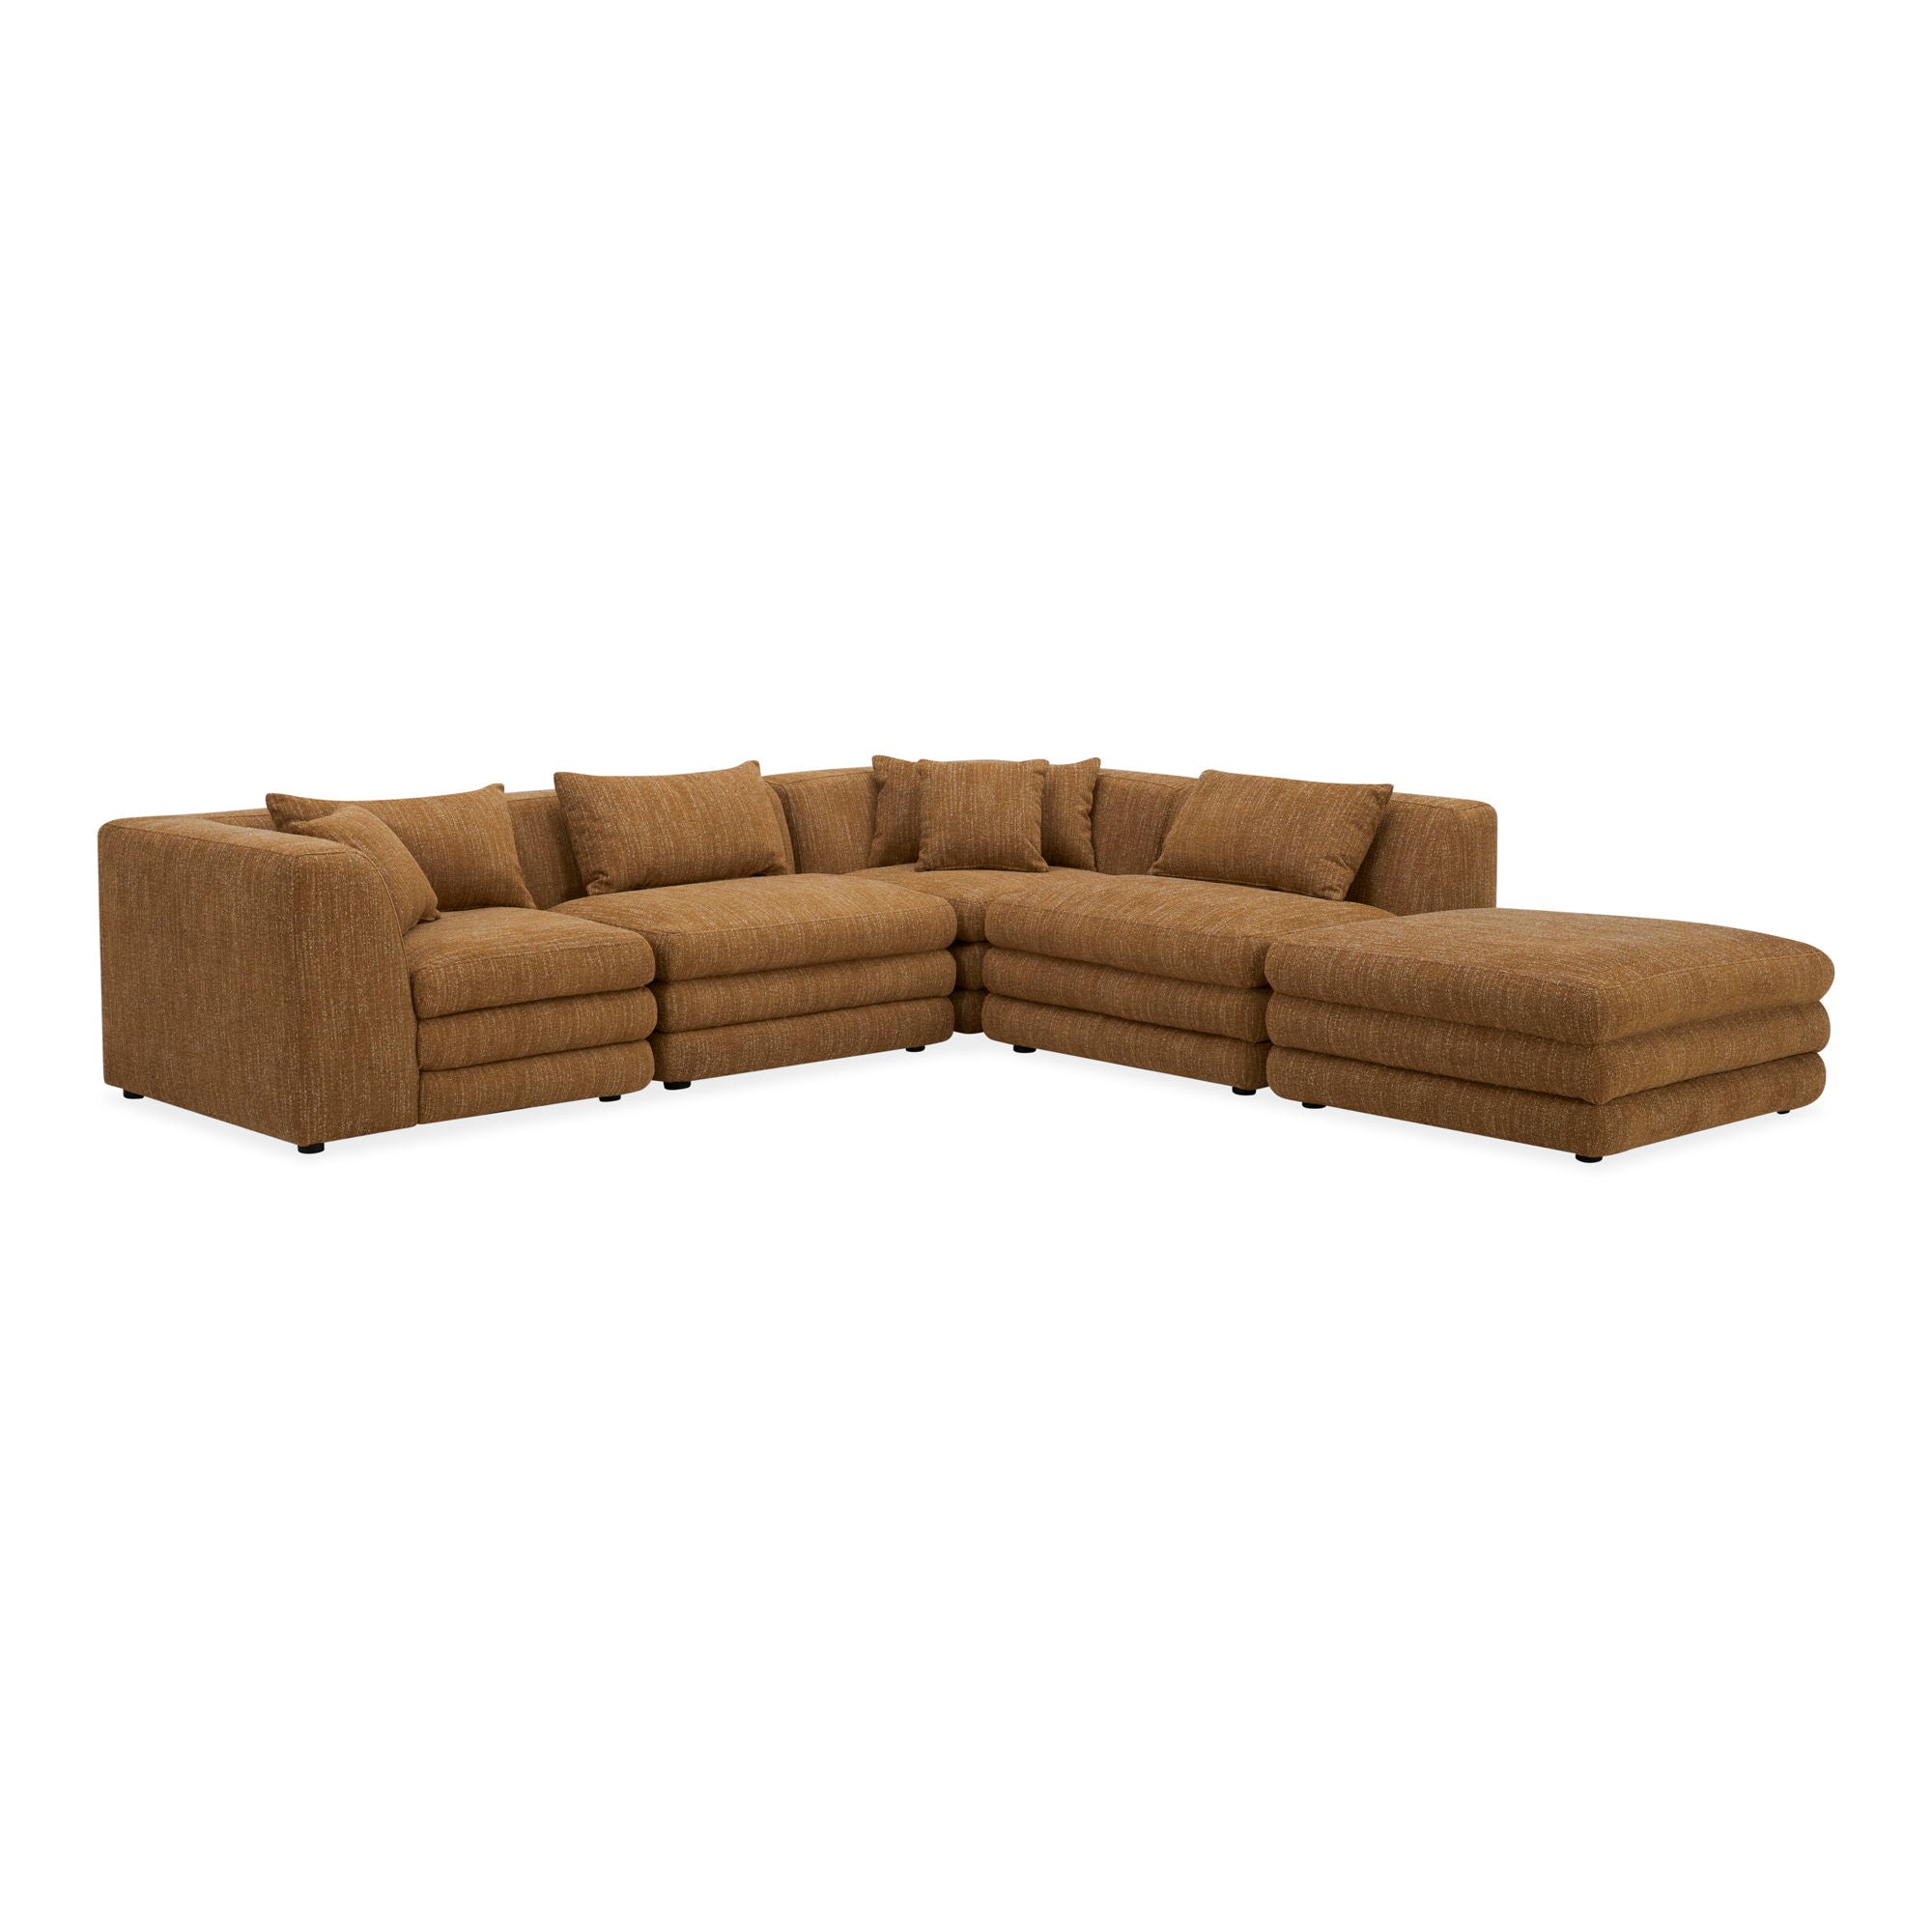 Lowtide - Dream Modular Configuration - Amber Glow-Stationary Sectionals-American Furniture Outlet